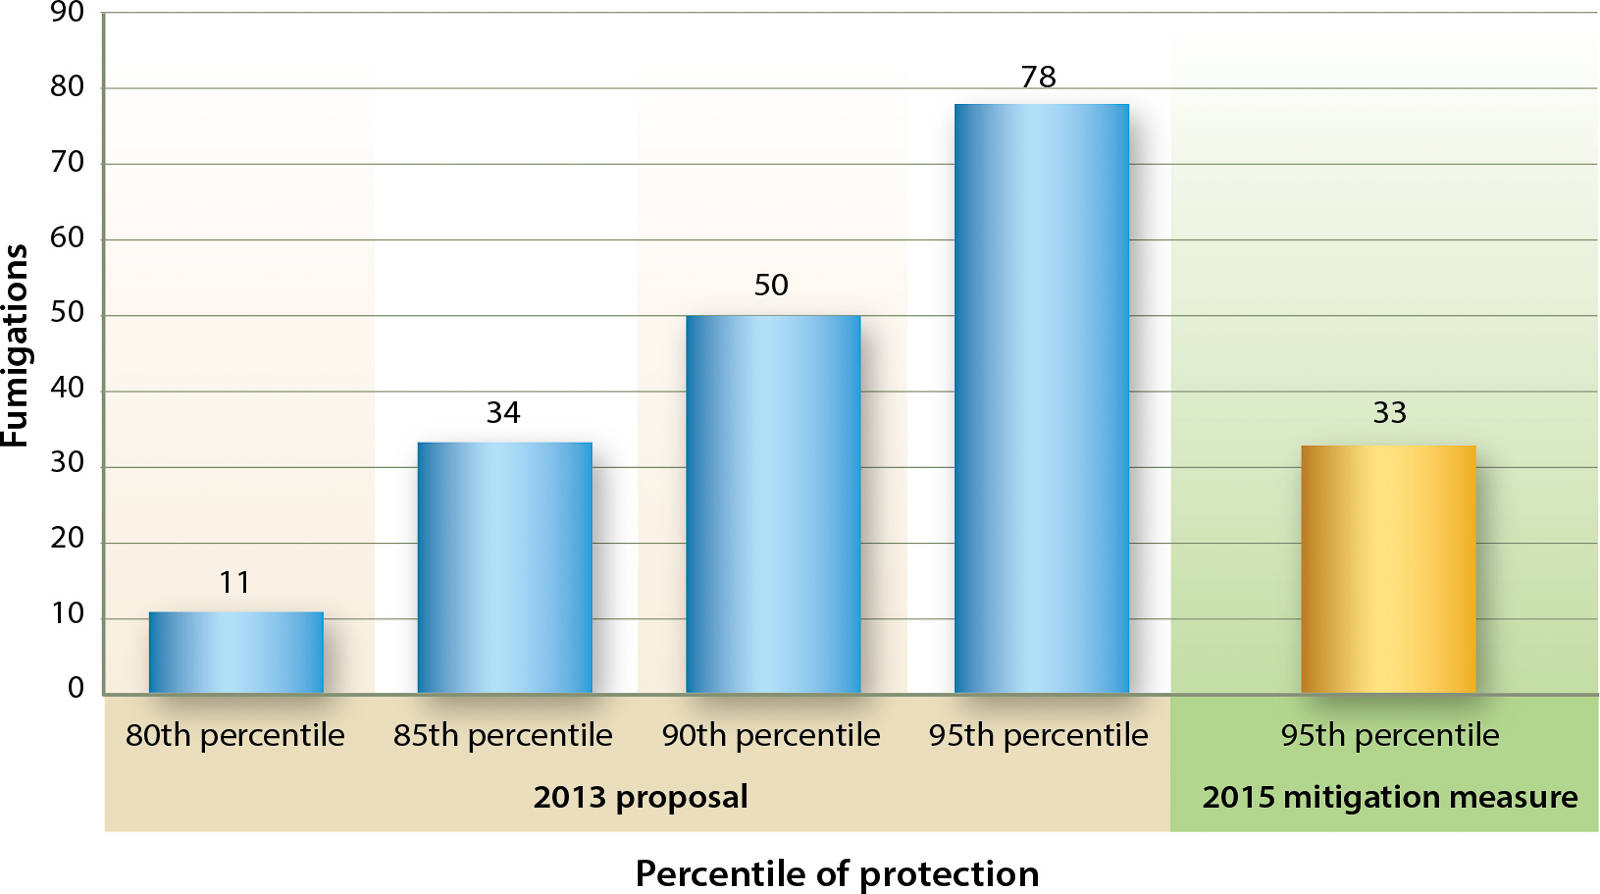 Number of the 269 Ventura County strawberry fumigation blocks in 2013 that would have sustained an increase in buffer zone distance if the DPR 2013 proposed or 2015 mitigation measures had been in effect, by percentile of protection.